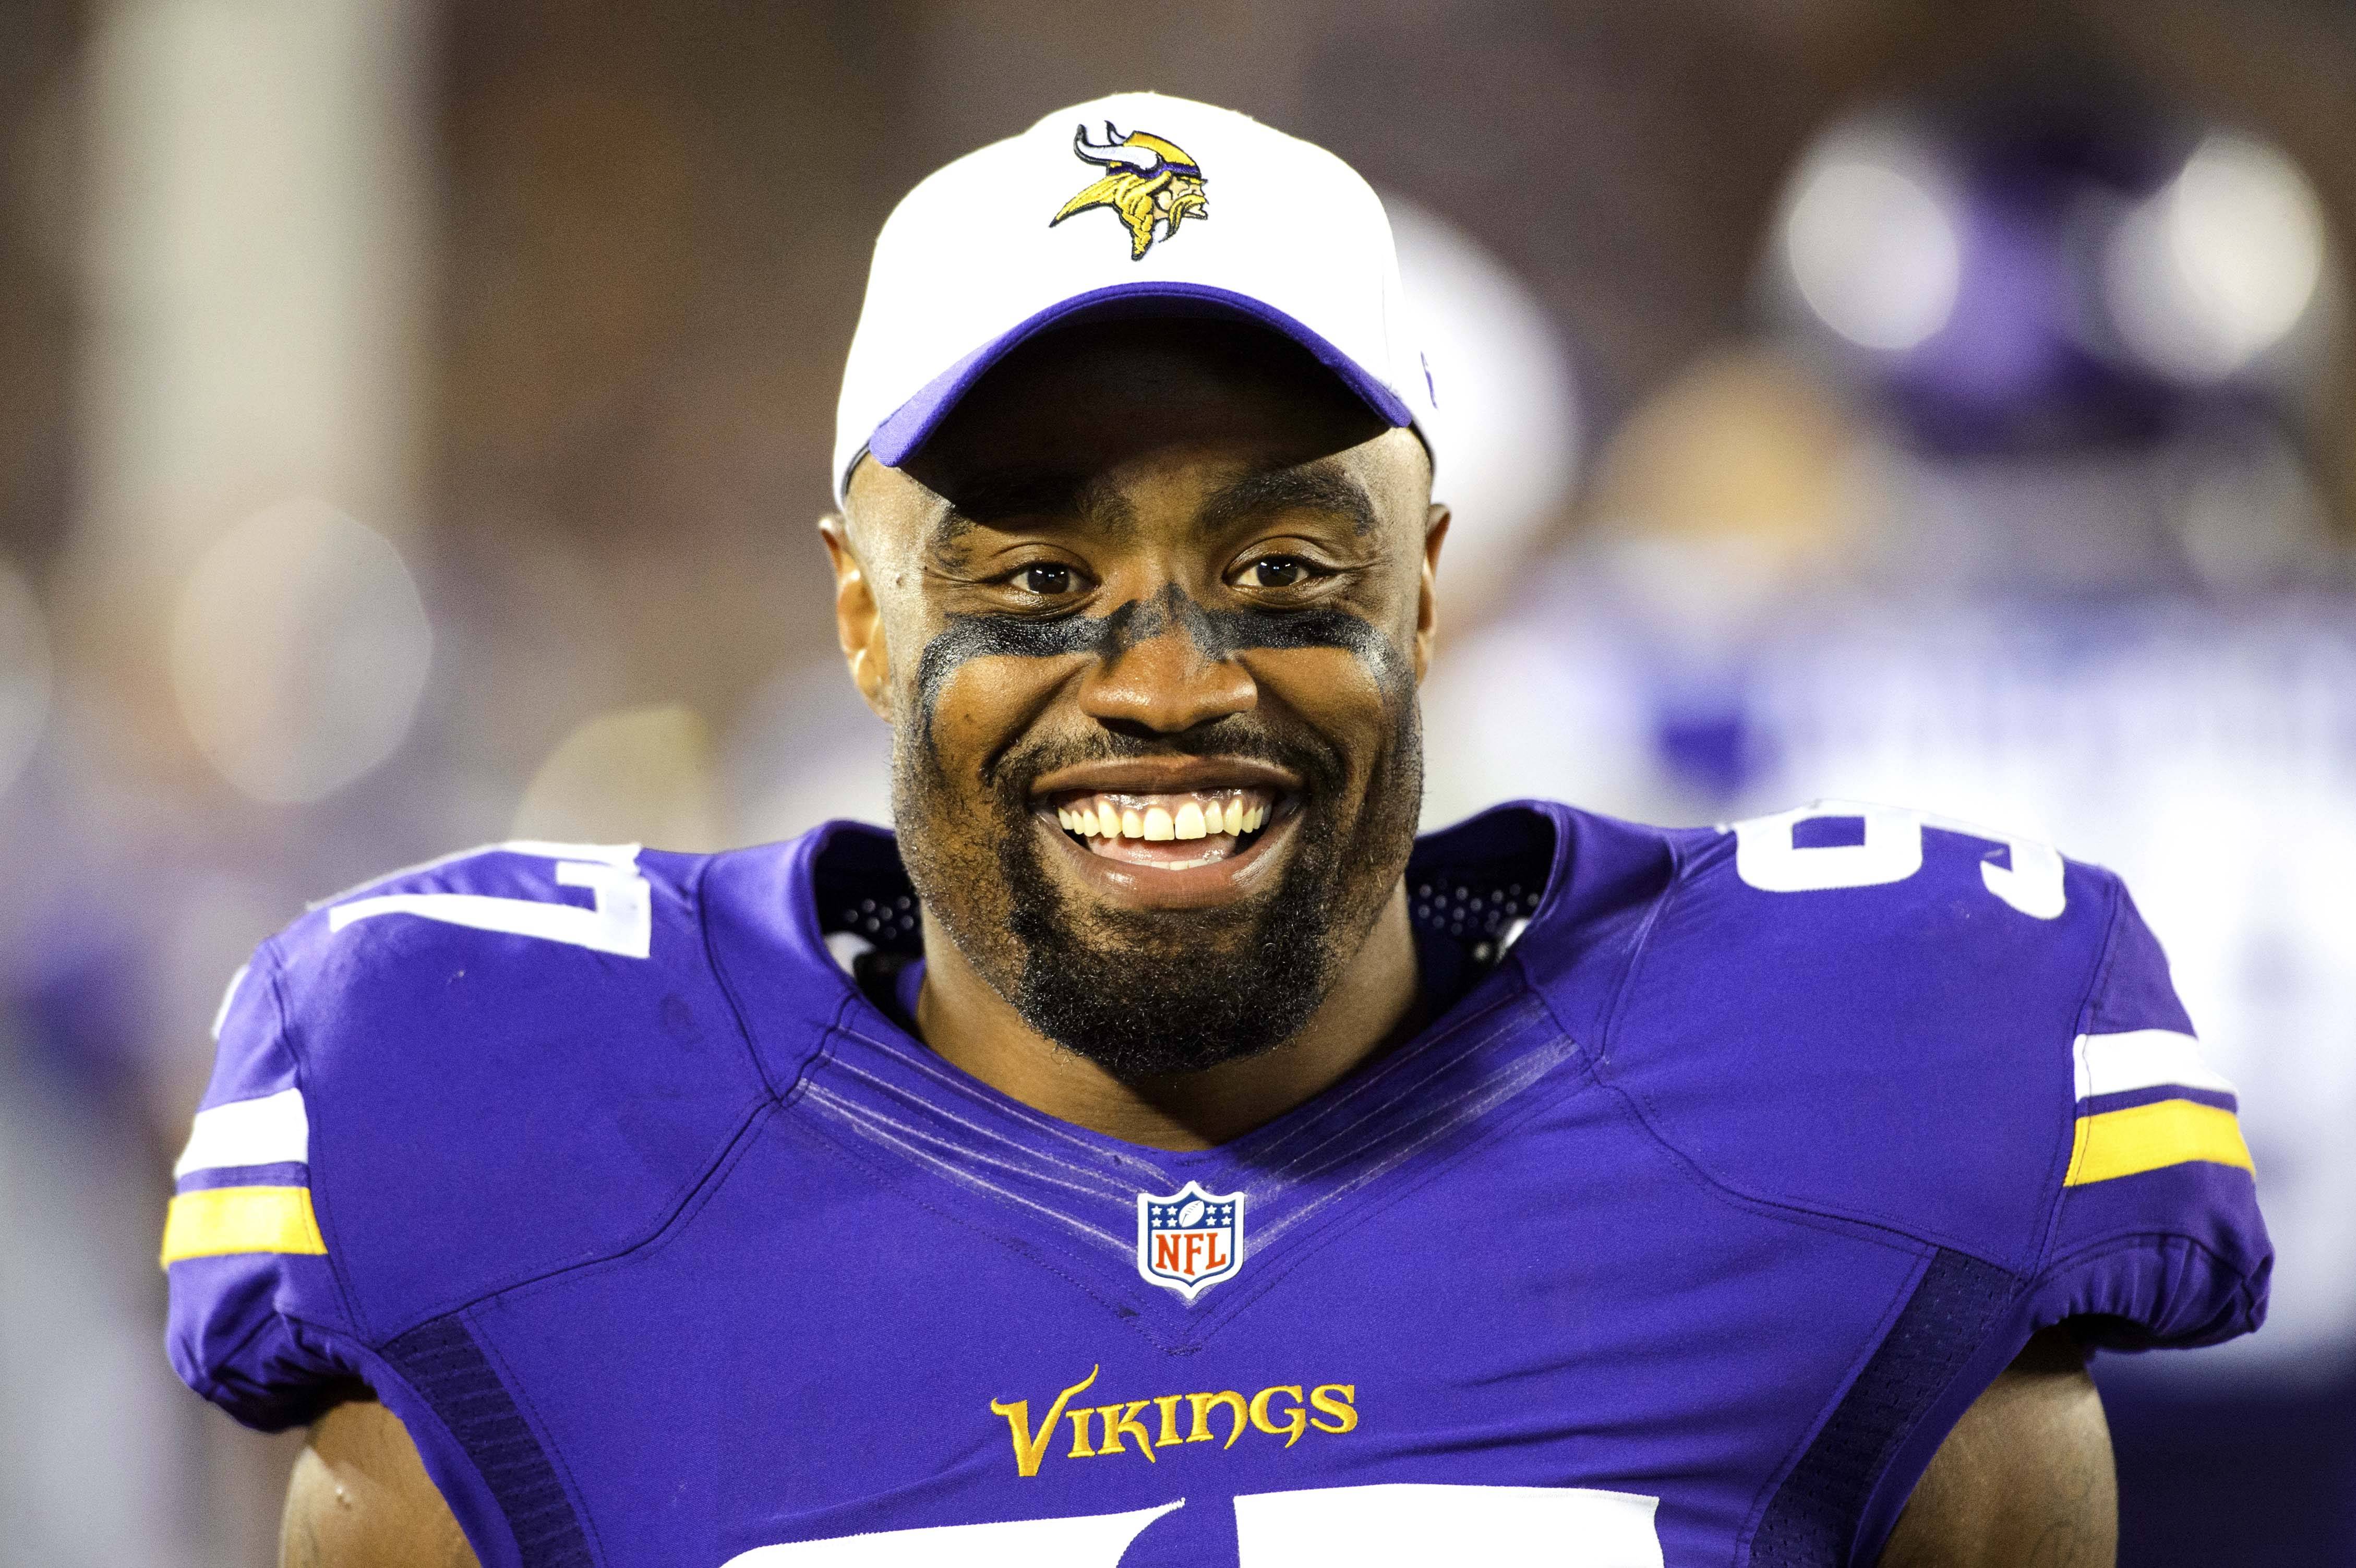 Vikings' Everson Griffen Used The Nationally-Televised Thanksgiving Game To  Ask People 'I Just Had A Baby Boy, What Should We Name Him?', News